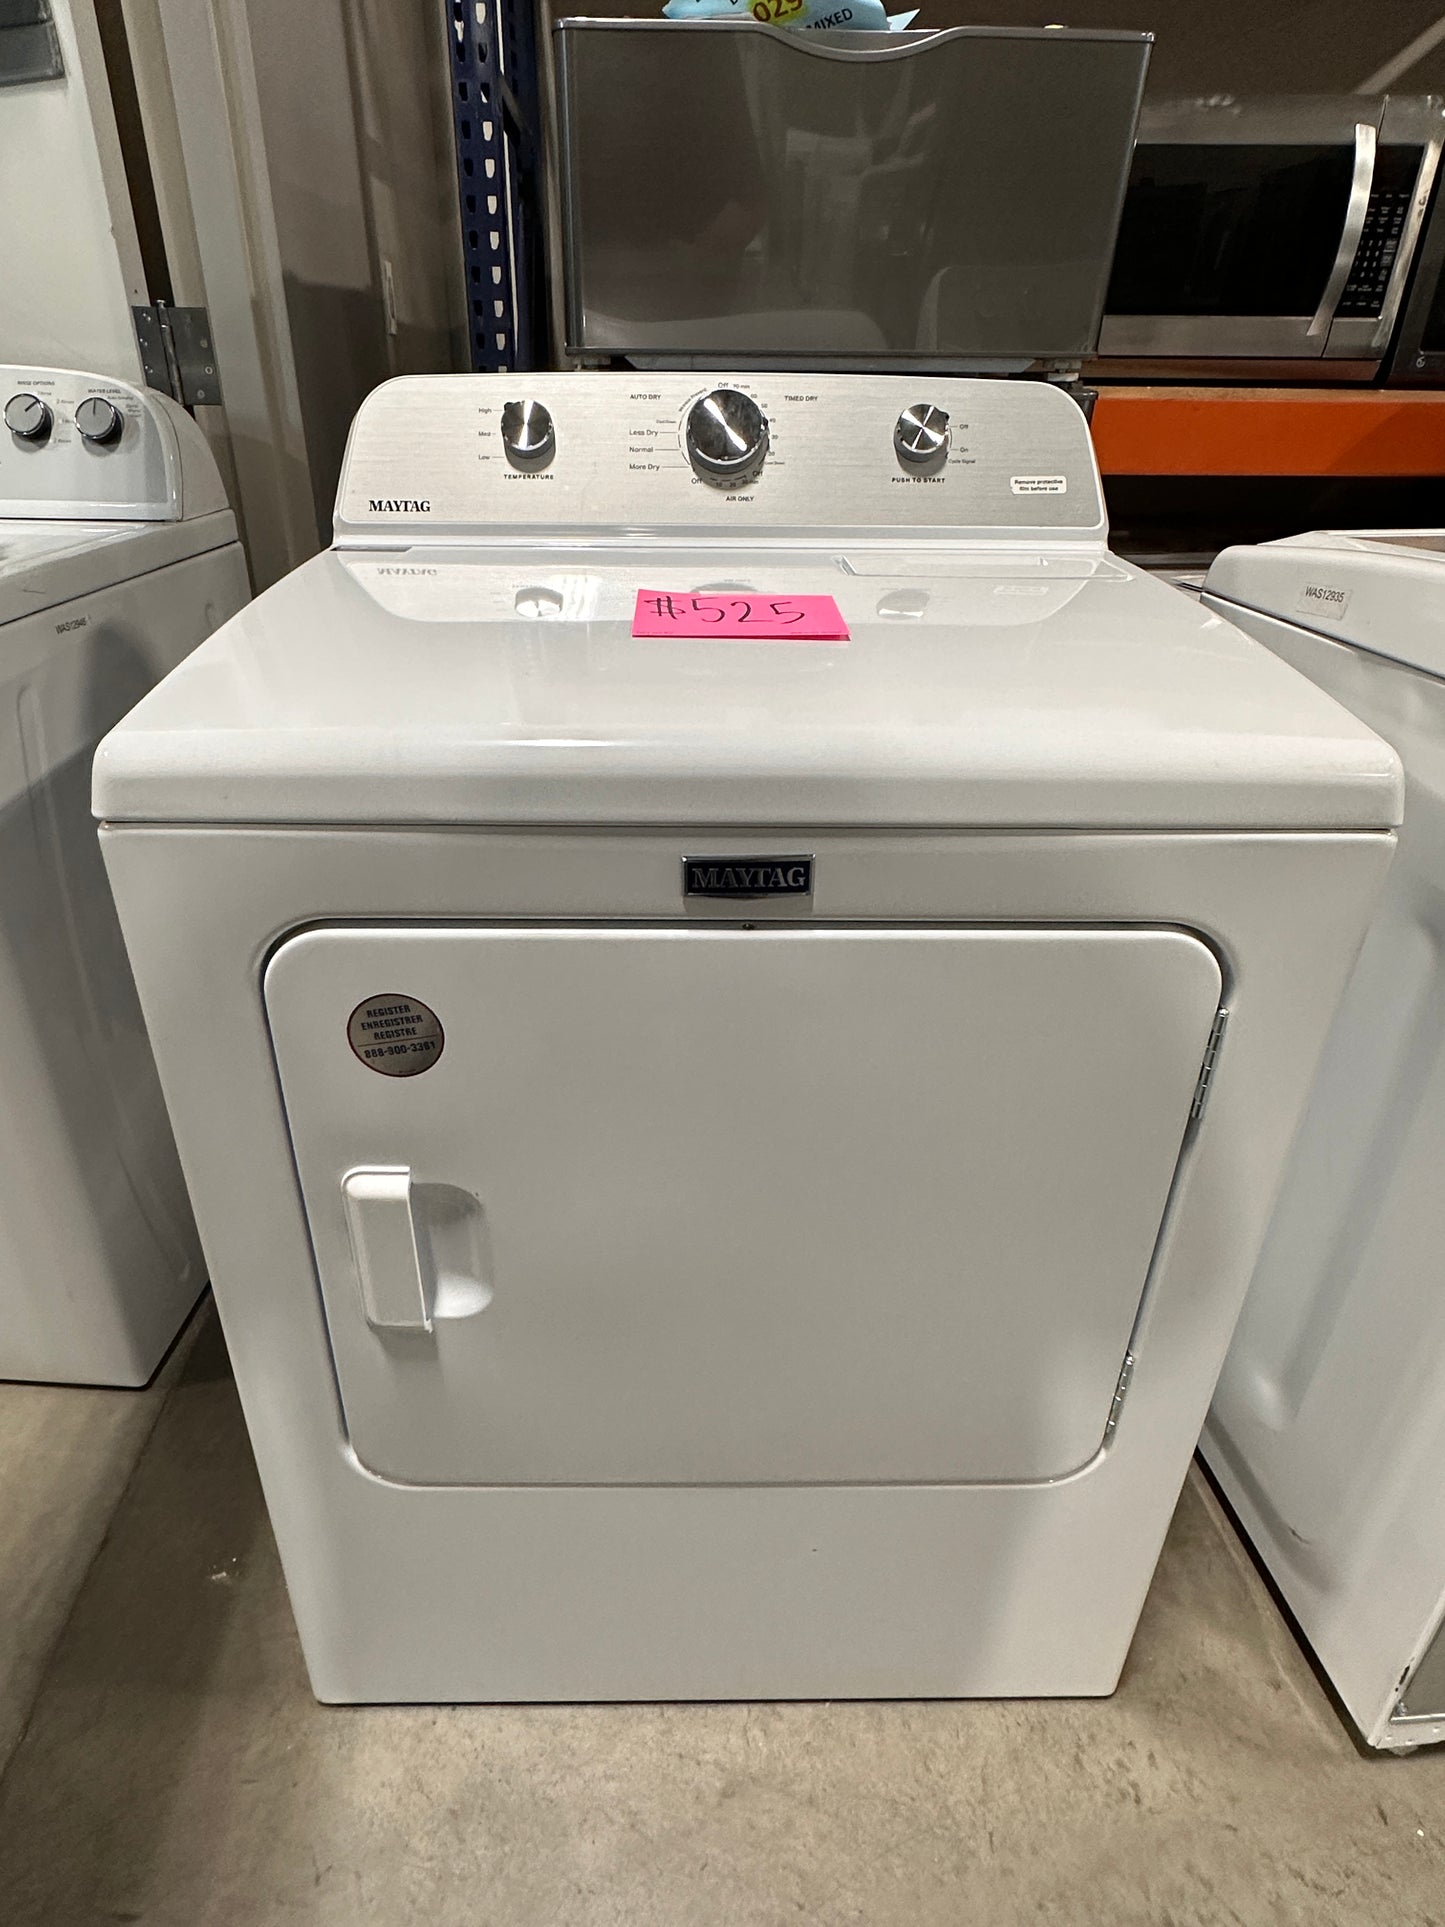 MAYTAG ELECTRIC DRYER with WRINKLE PREVENT - DRY12285 MED4500MW